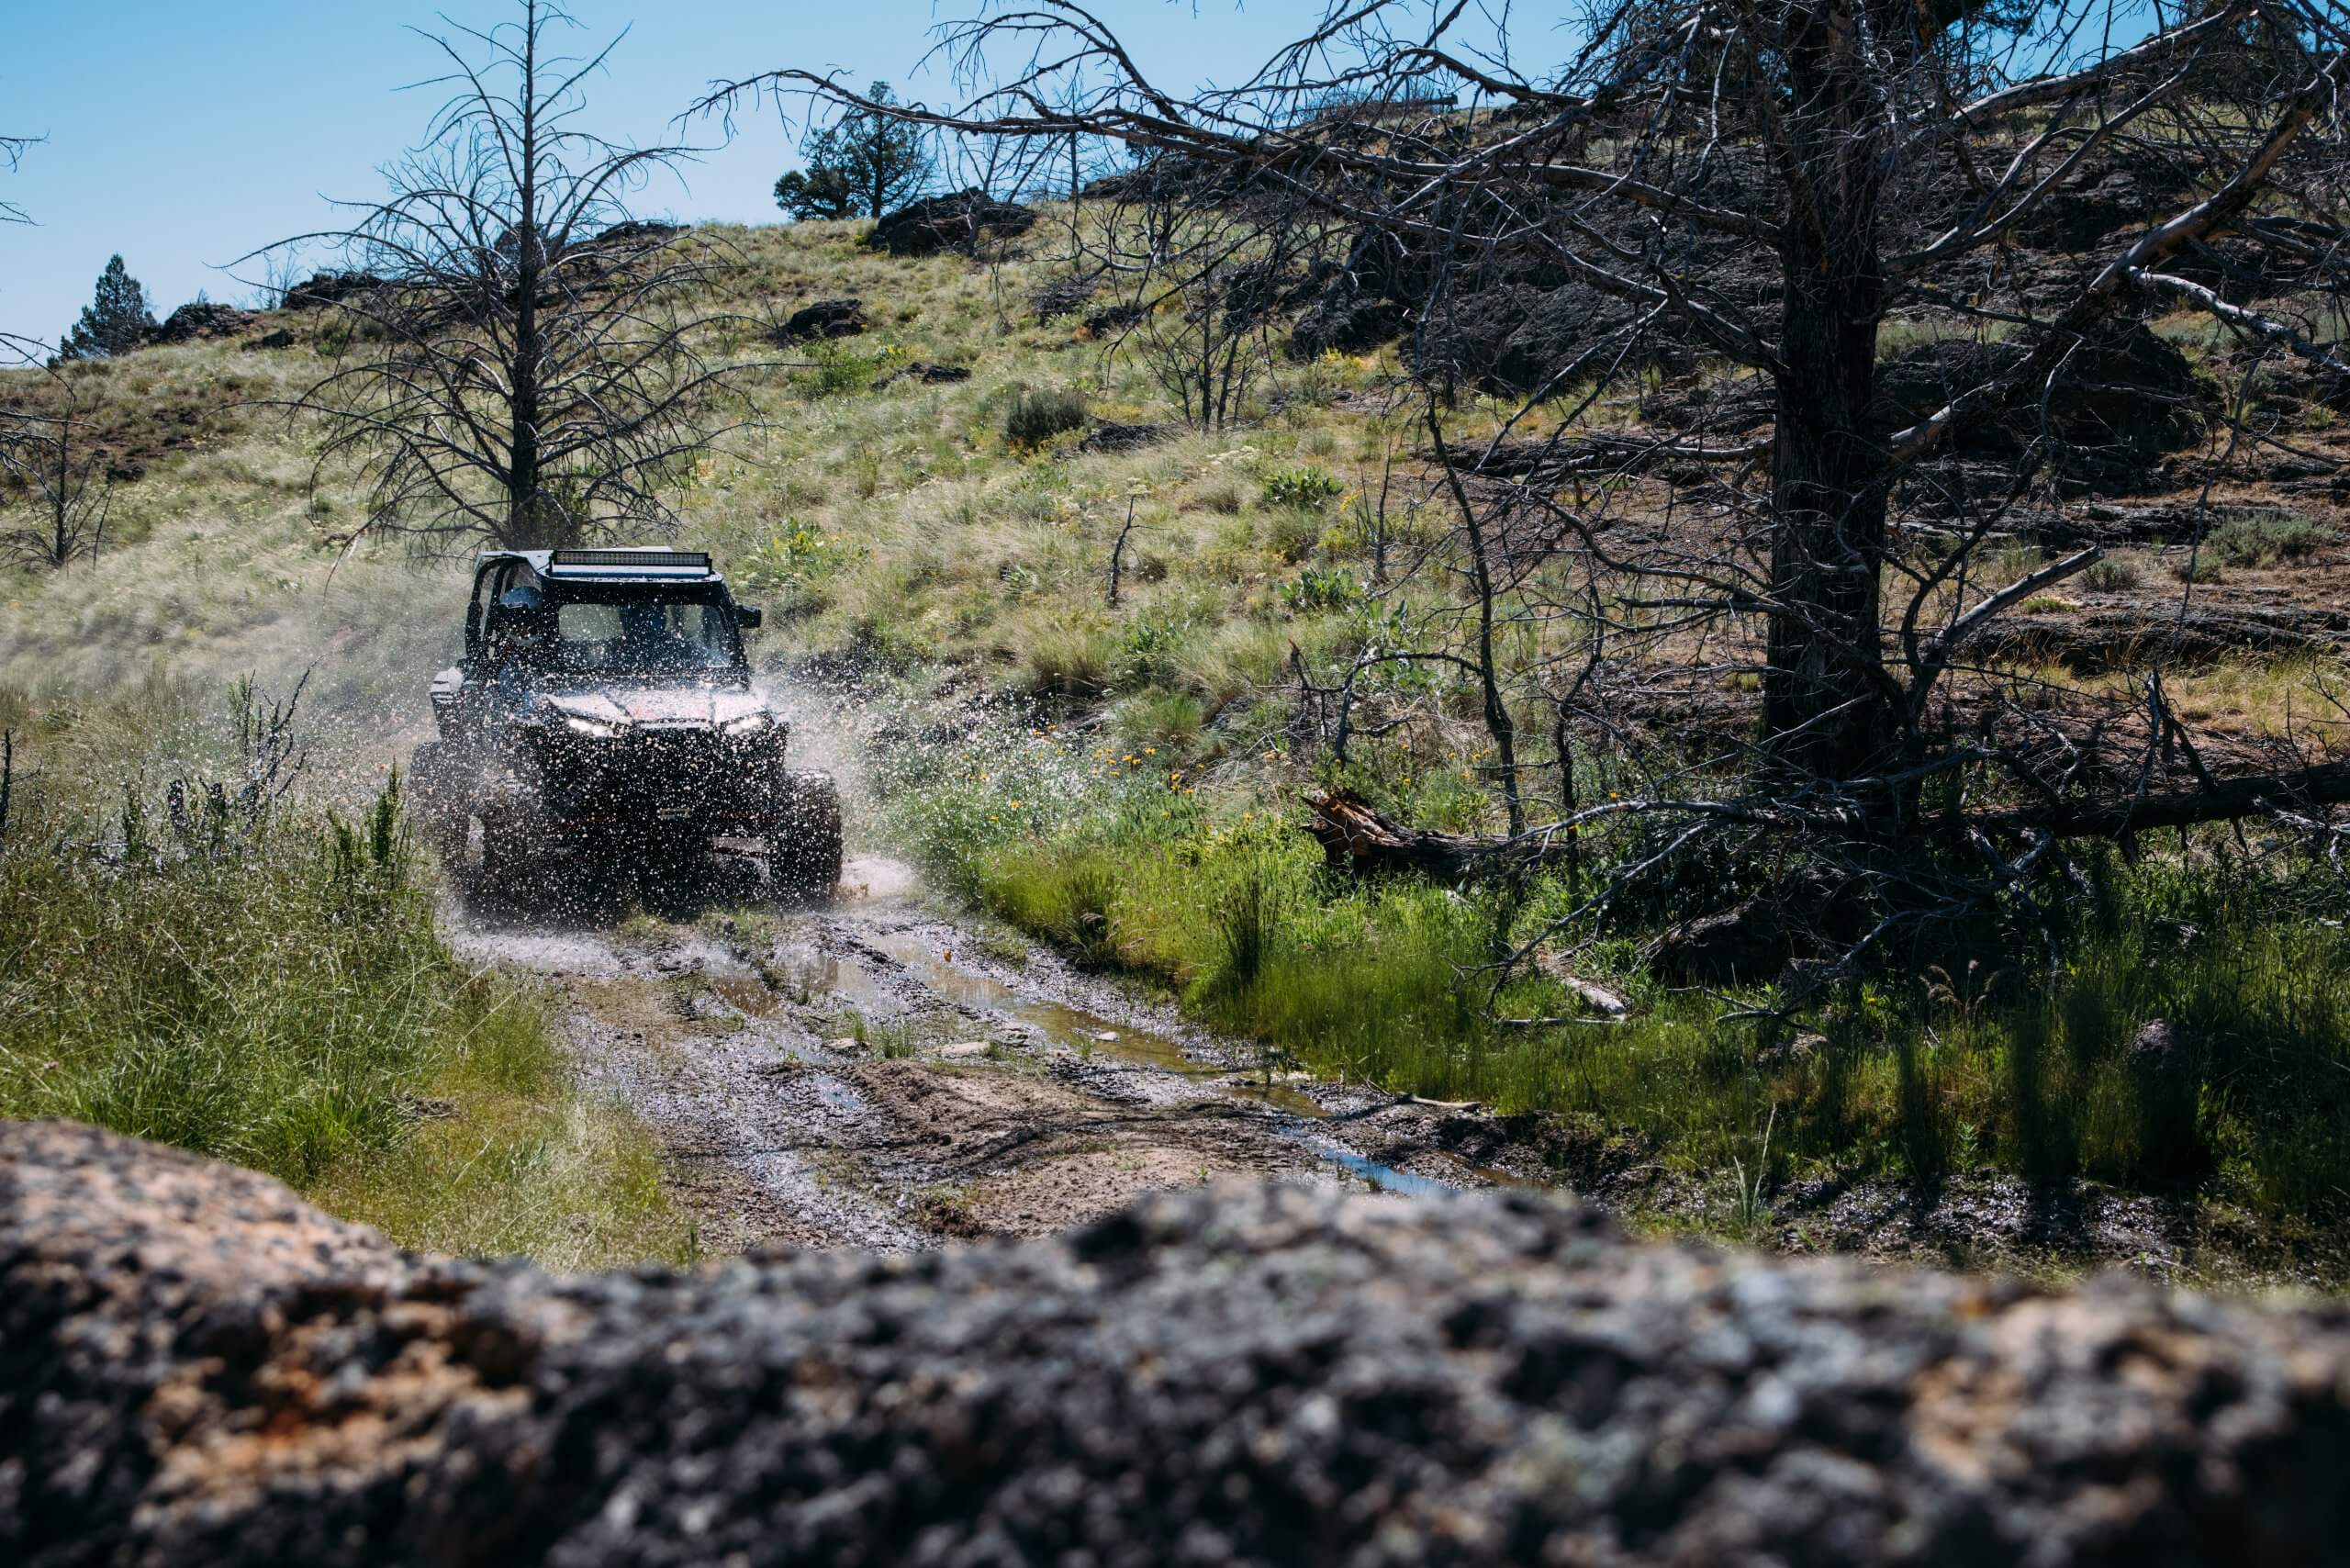 a UTV splashing through water on a muddy trail, surrounded by trees